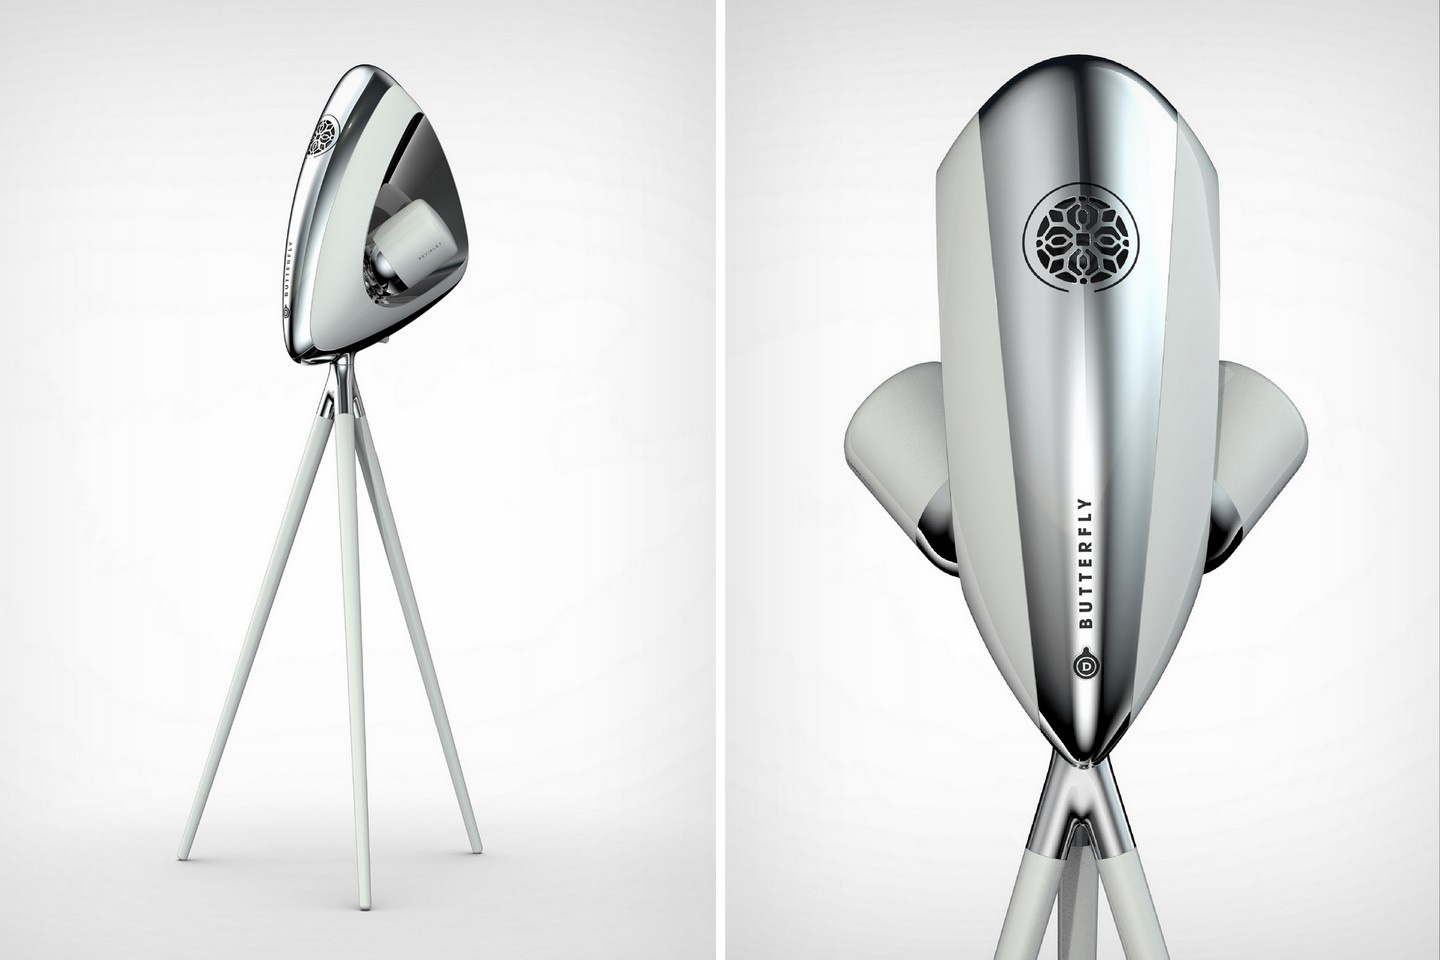 Stunning Devialet Butterfly speaker concept comes with an elegant design and dual-firing audio chambers